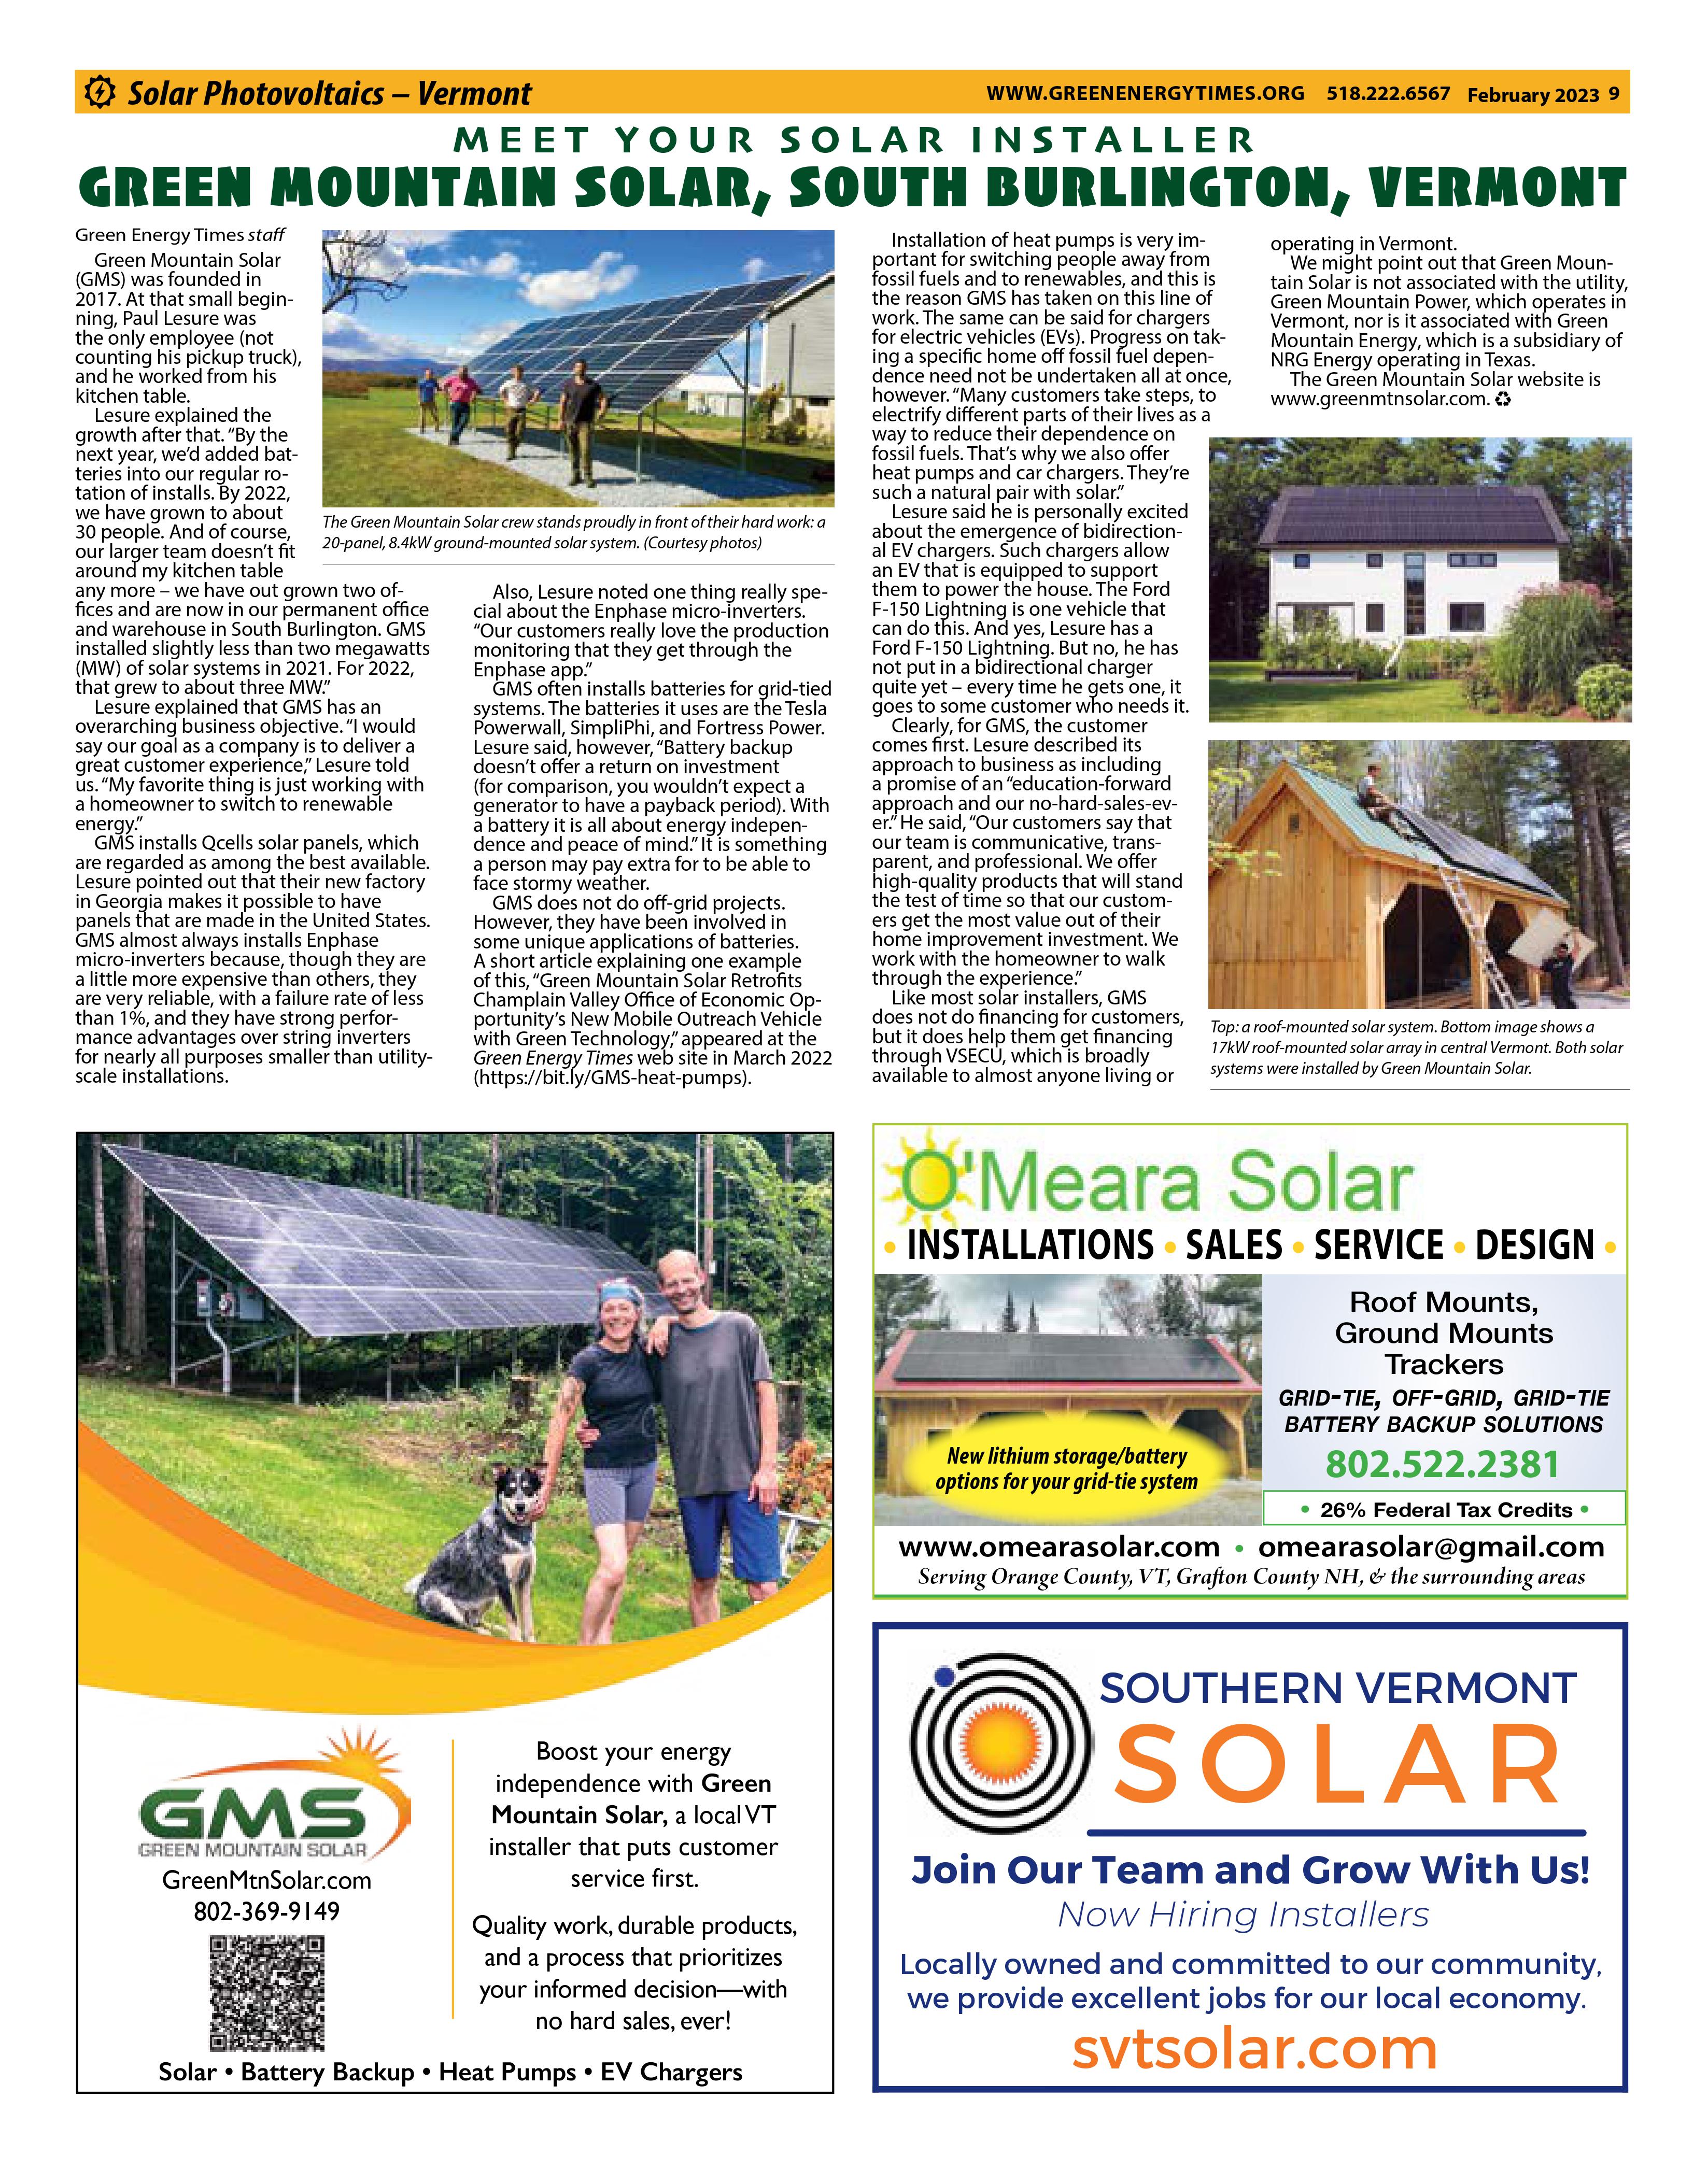 green-mountain-solar-2022-profile-and-reviews-energysage